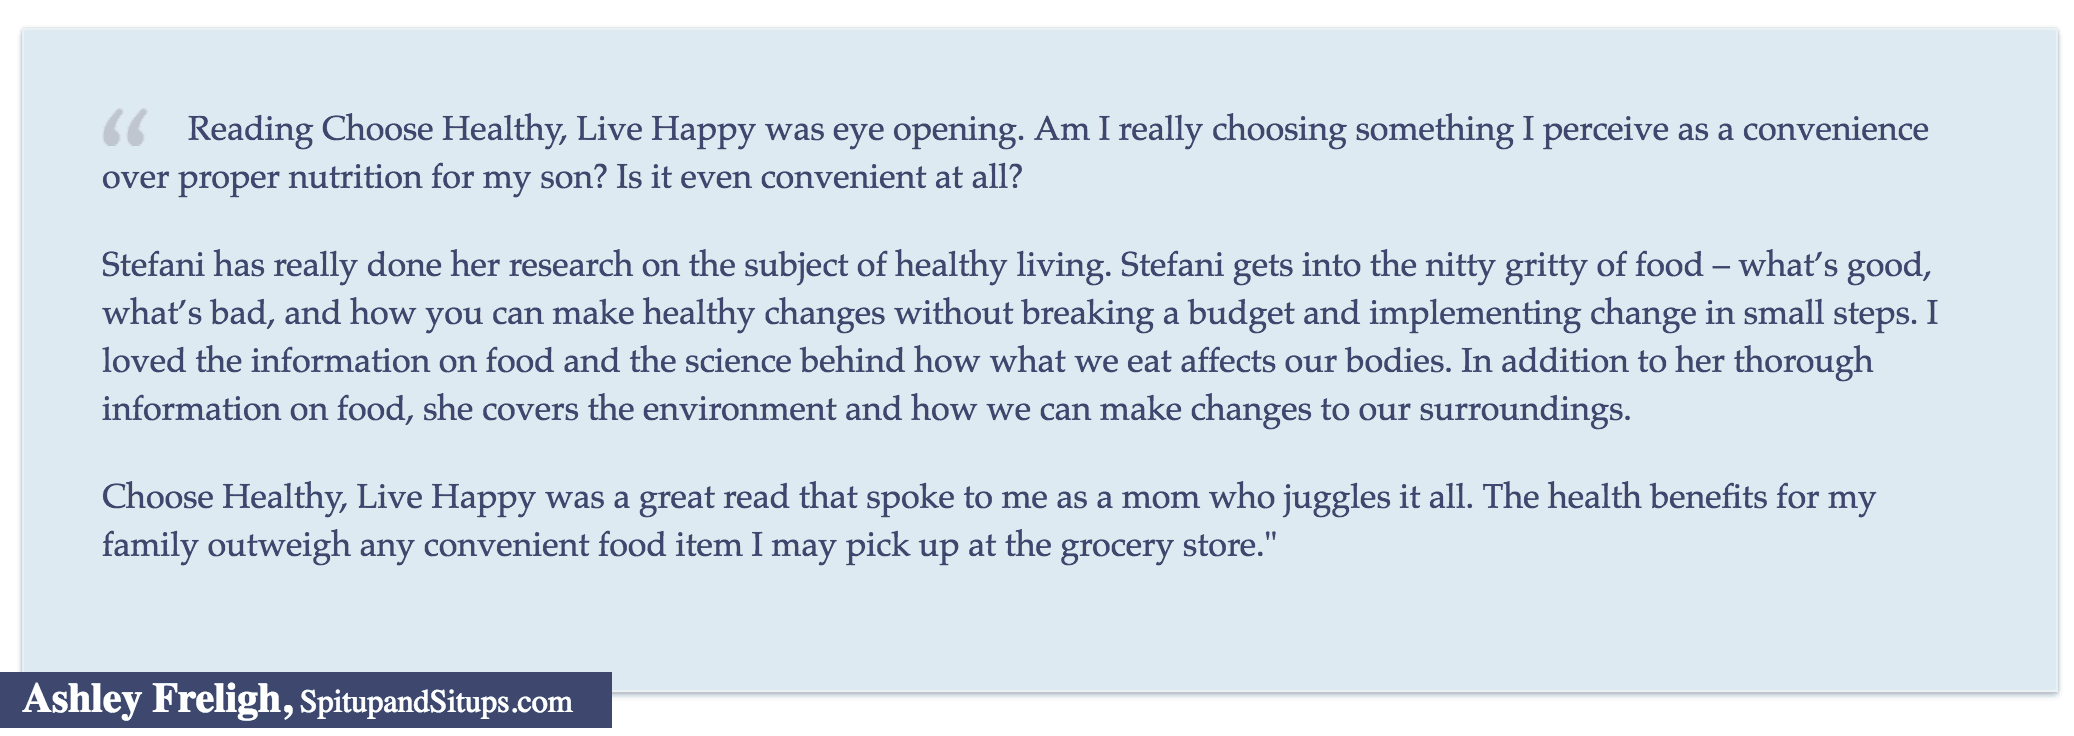 Reading Choose Healthy, Live Happy was eye opening. Am I really choosing something I perceive as a convenience over proper nutrition for my son? Is it even convenient at all?" Ashley Freligh, SpitupandSitups.com